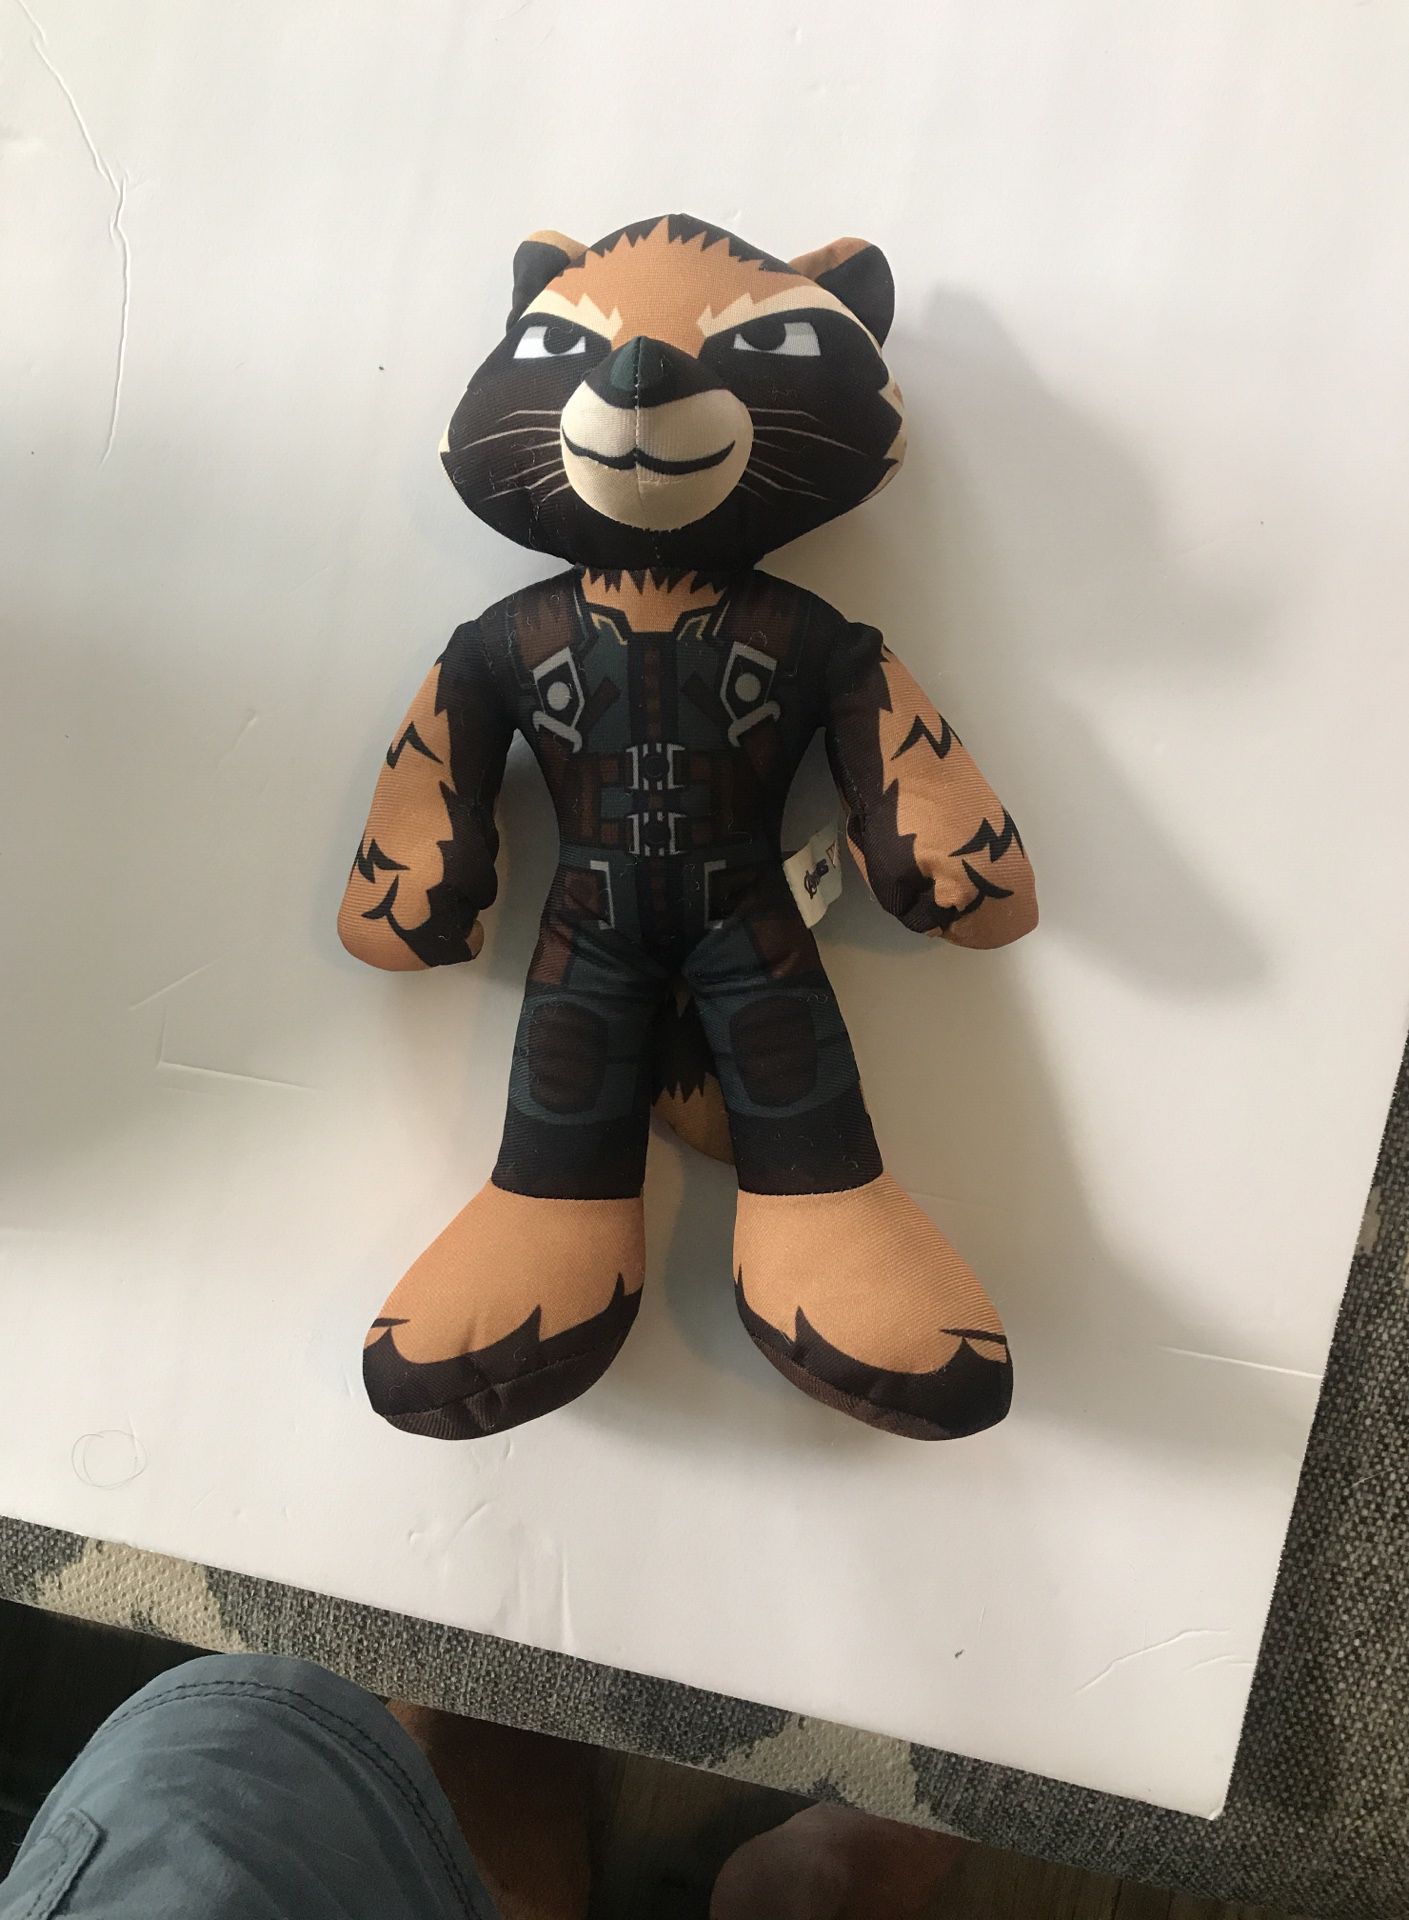 Avengers Marvel Doll Rocket Raccoon 13" plush toy collectible